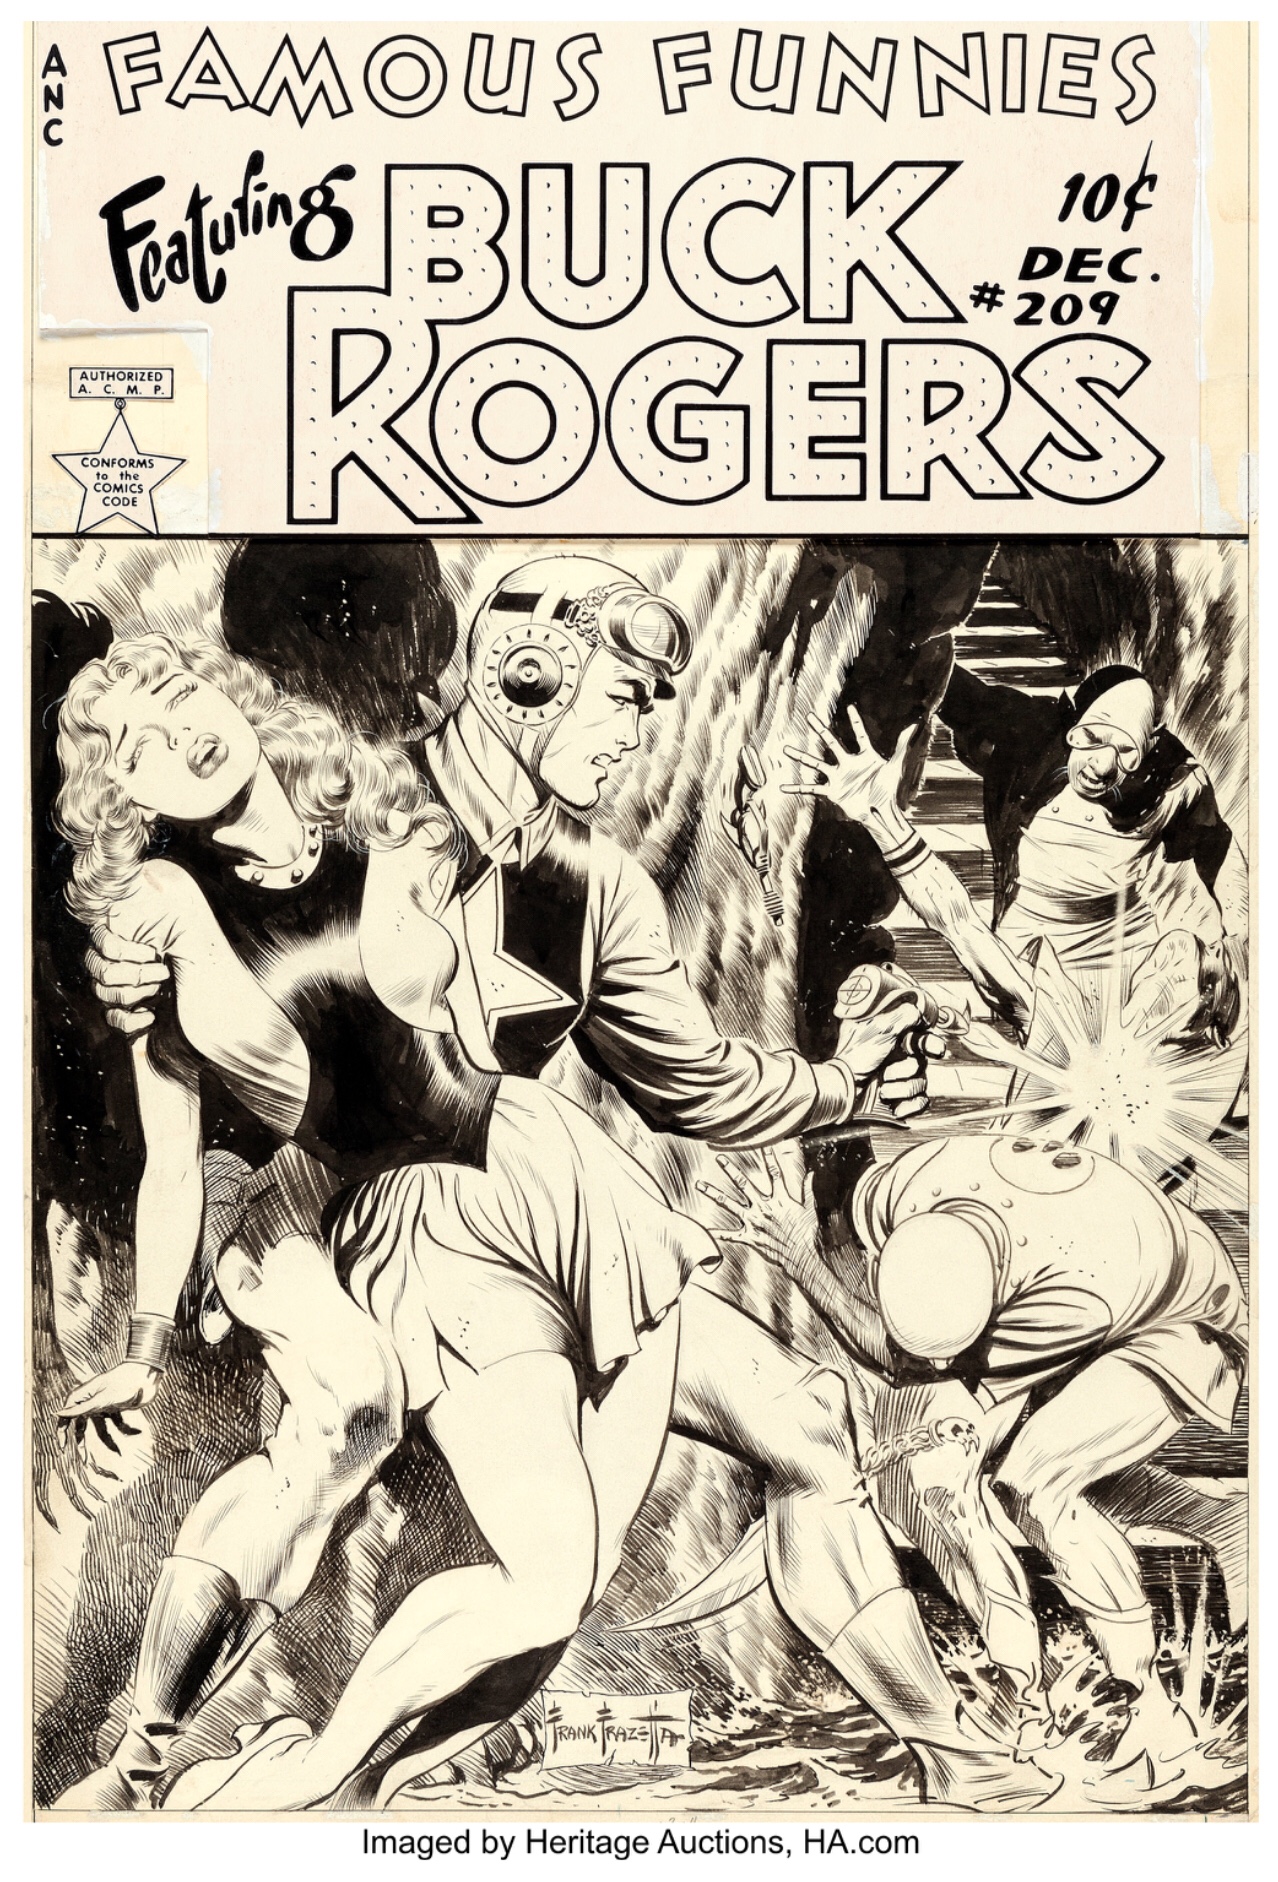 Famous Funnies #209 Buck Rogers cover by Frank Frazetta